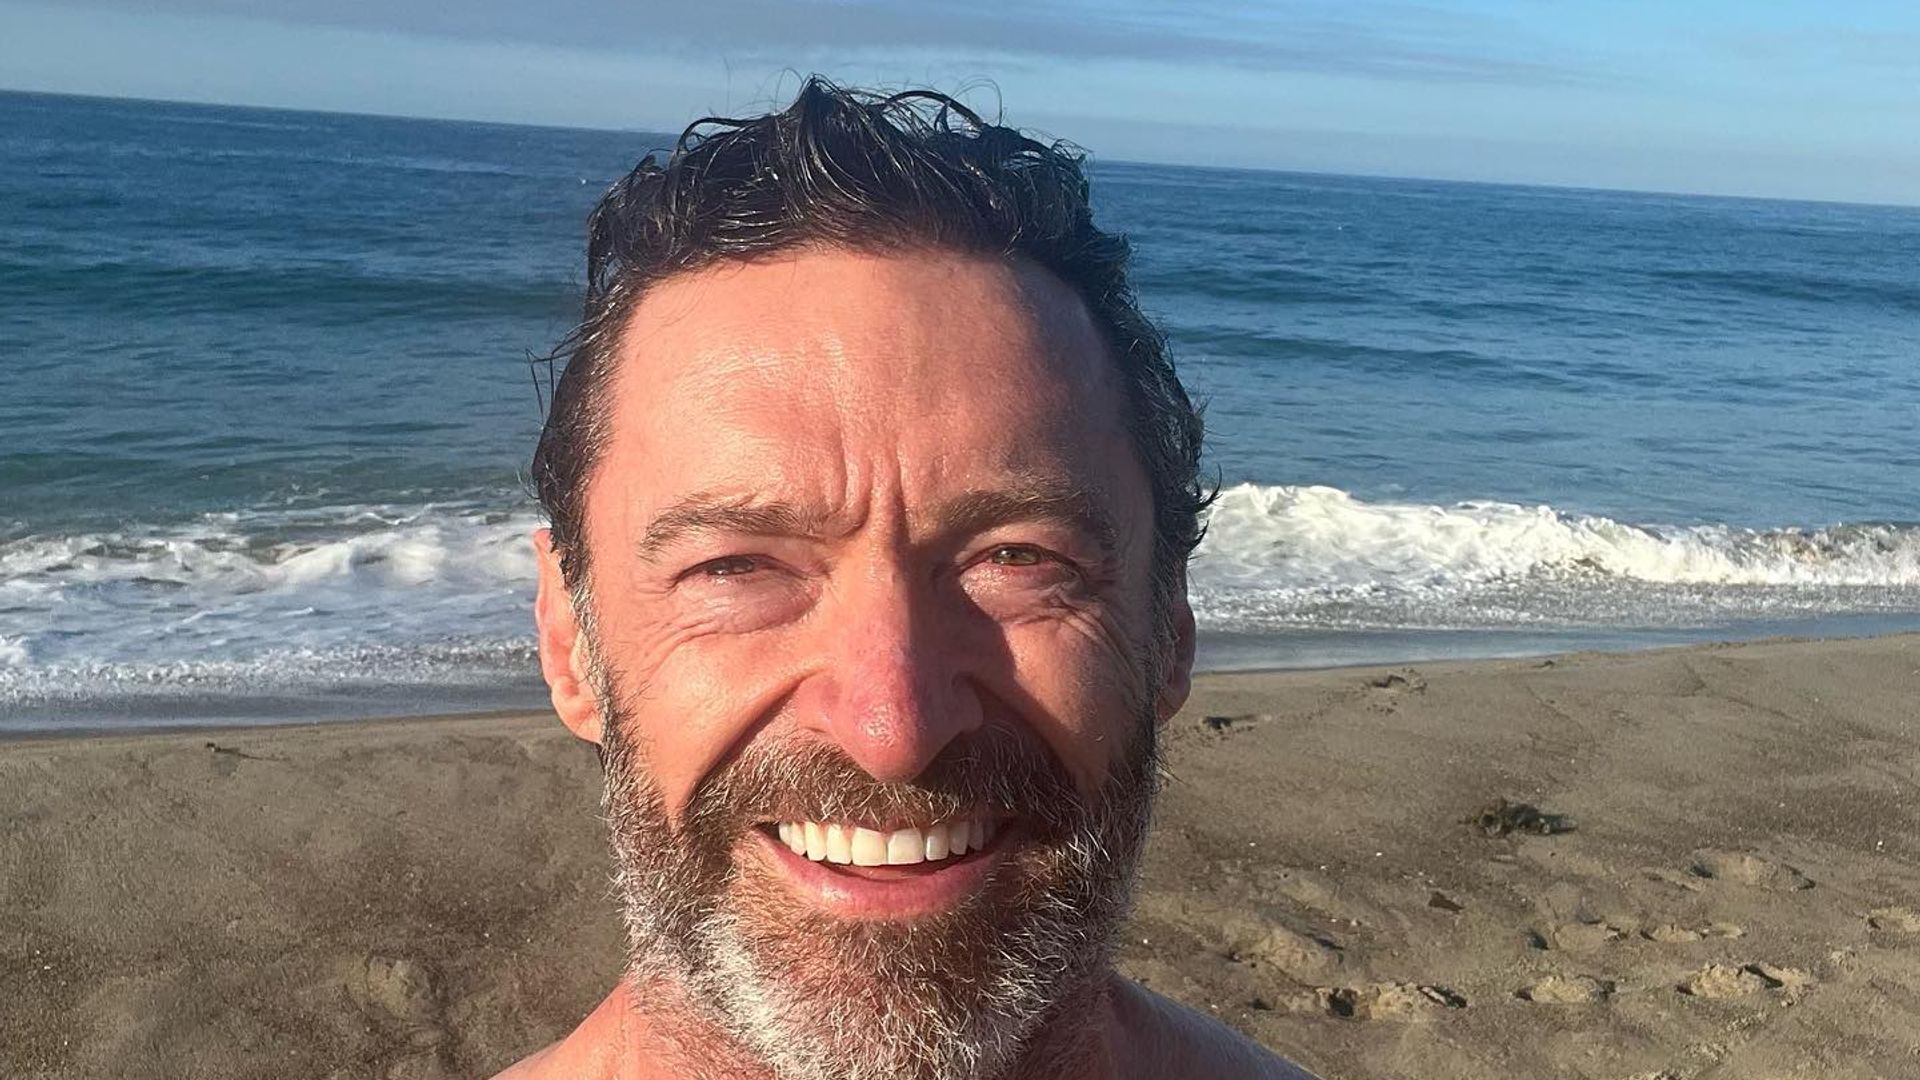 Hugh Jackman shows off his insane workout routine and the secret to his bulging biceps in latest post